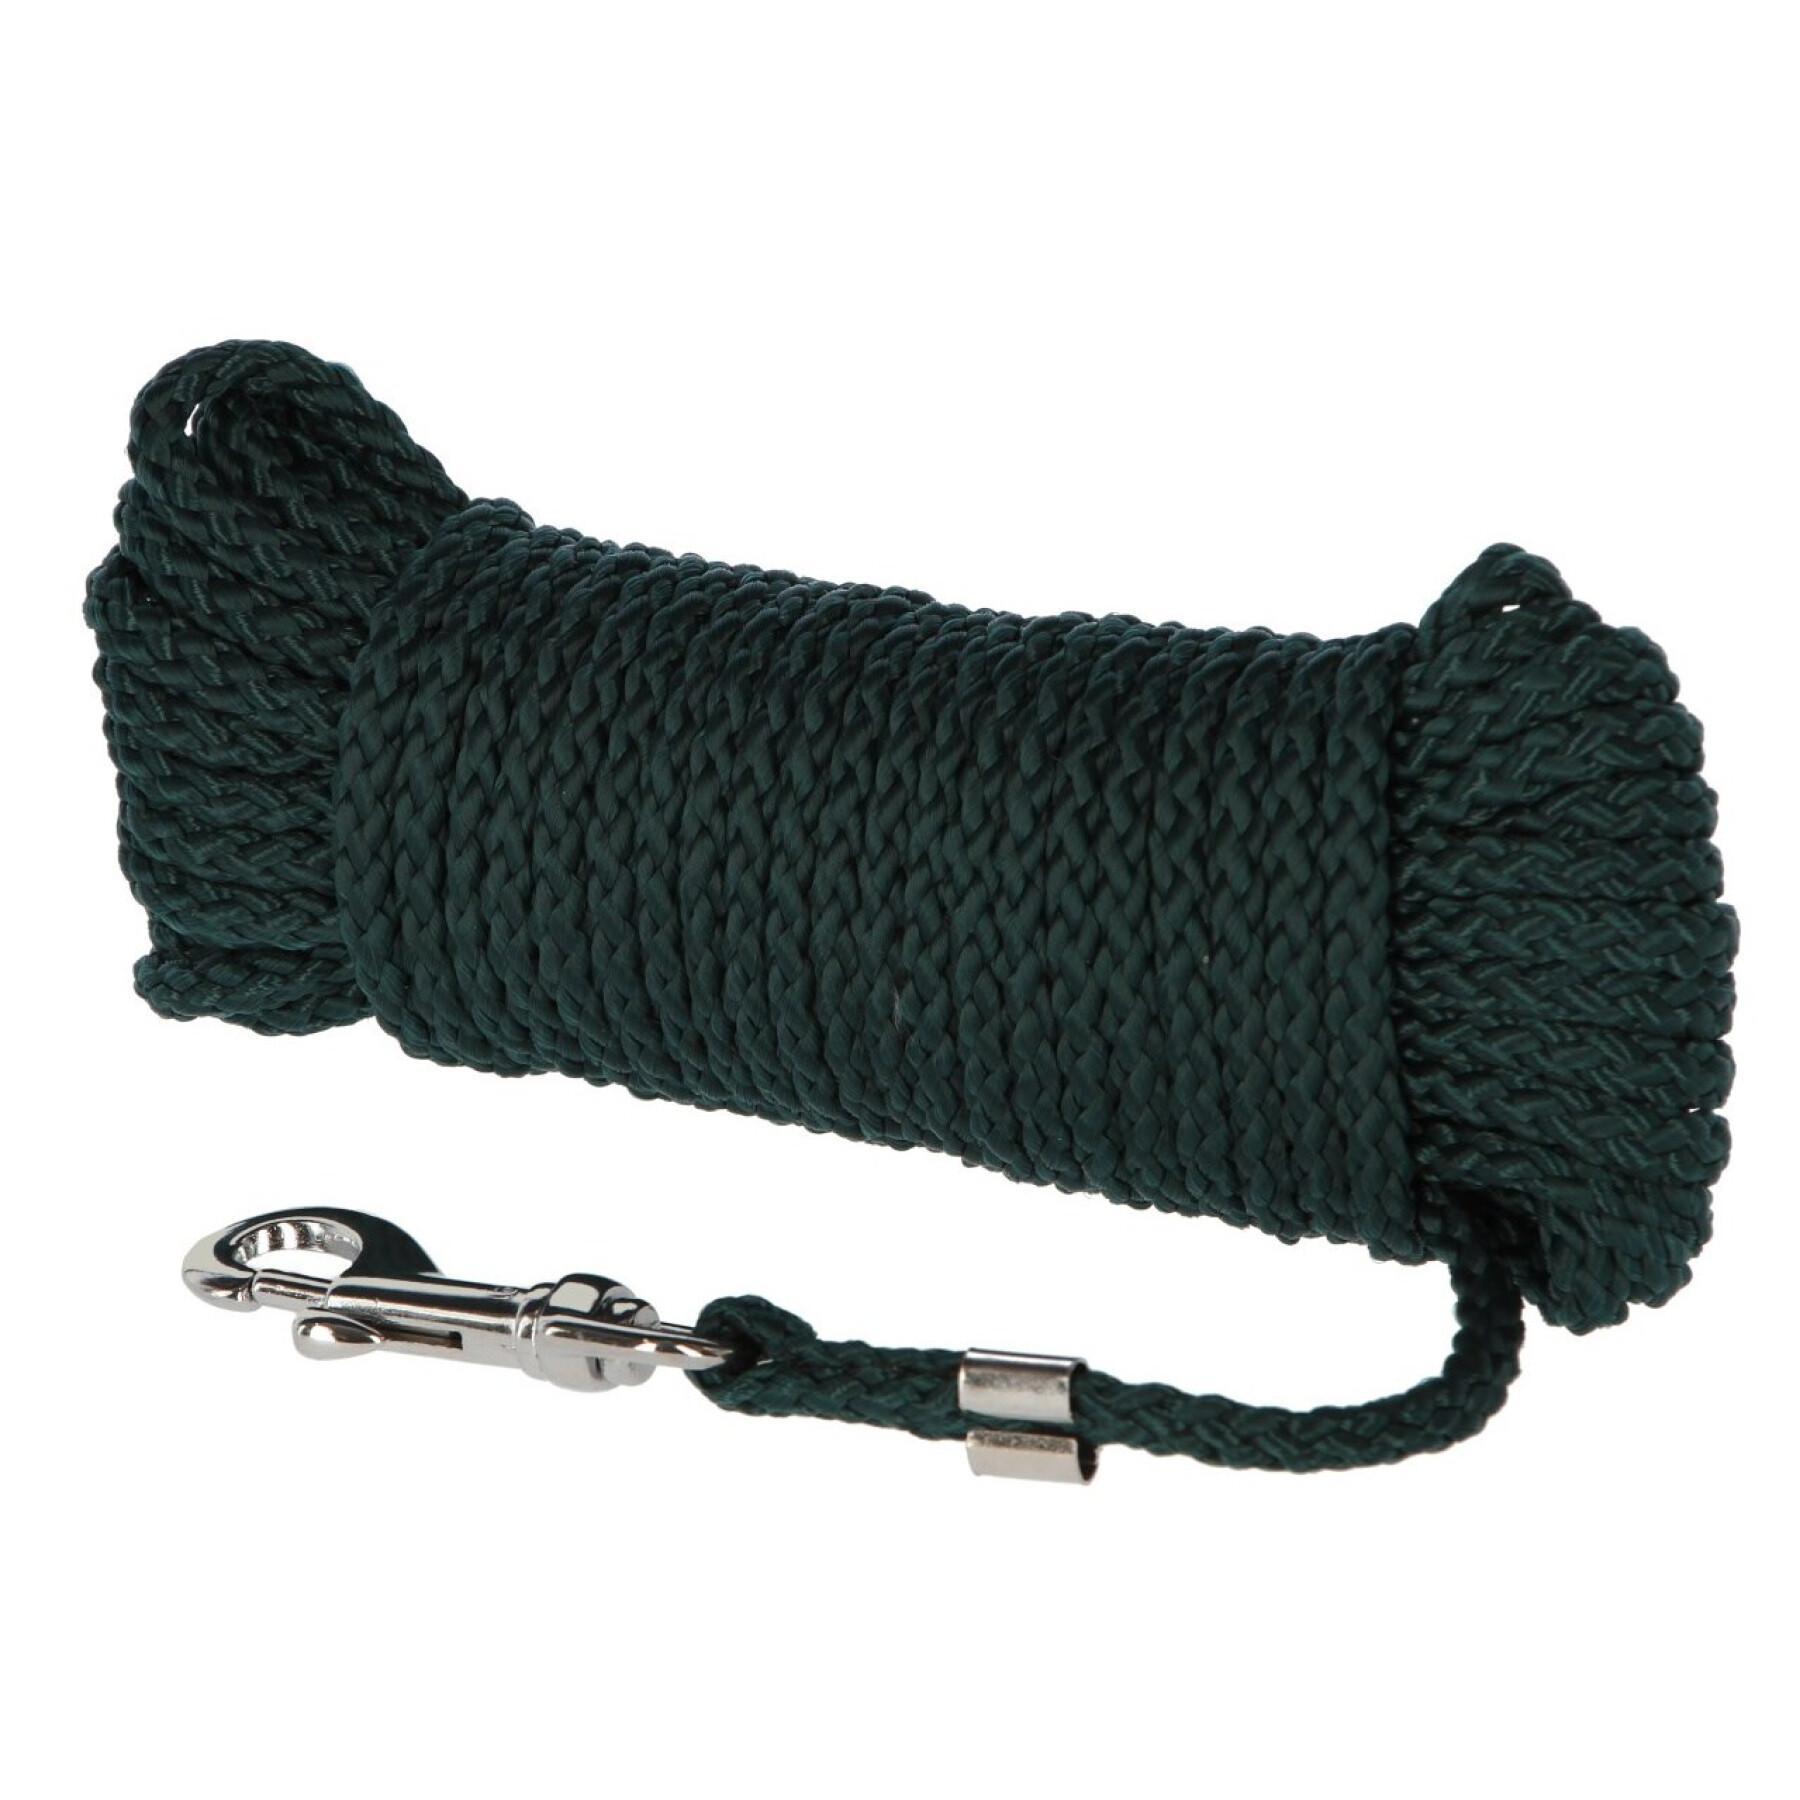 Working and searching leash for dogs Kerbl